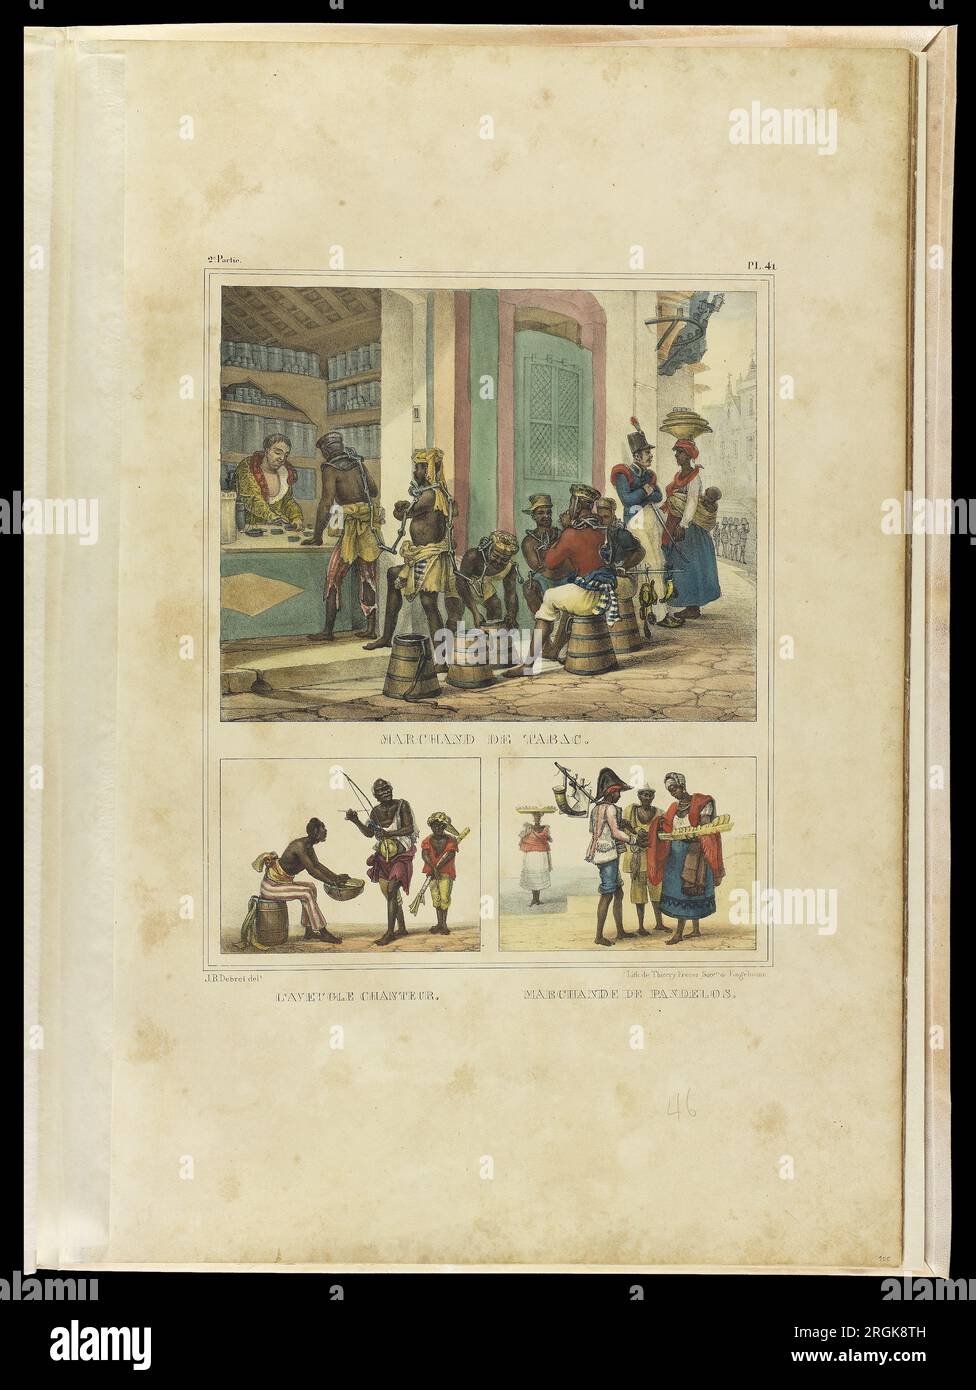 Marchand de tabac 1835 by Thierry Frères Stock Photo